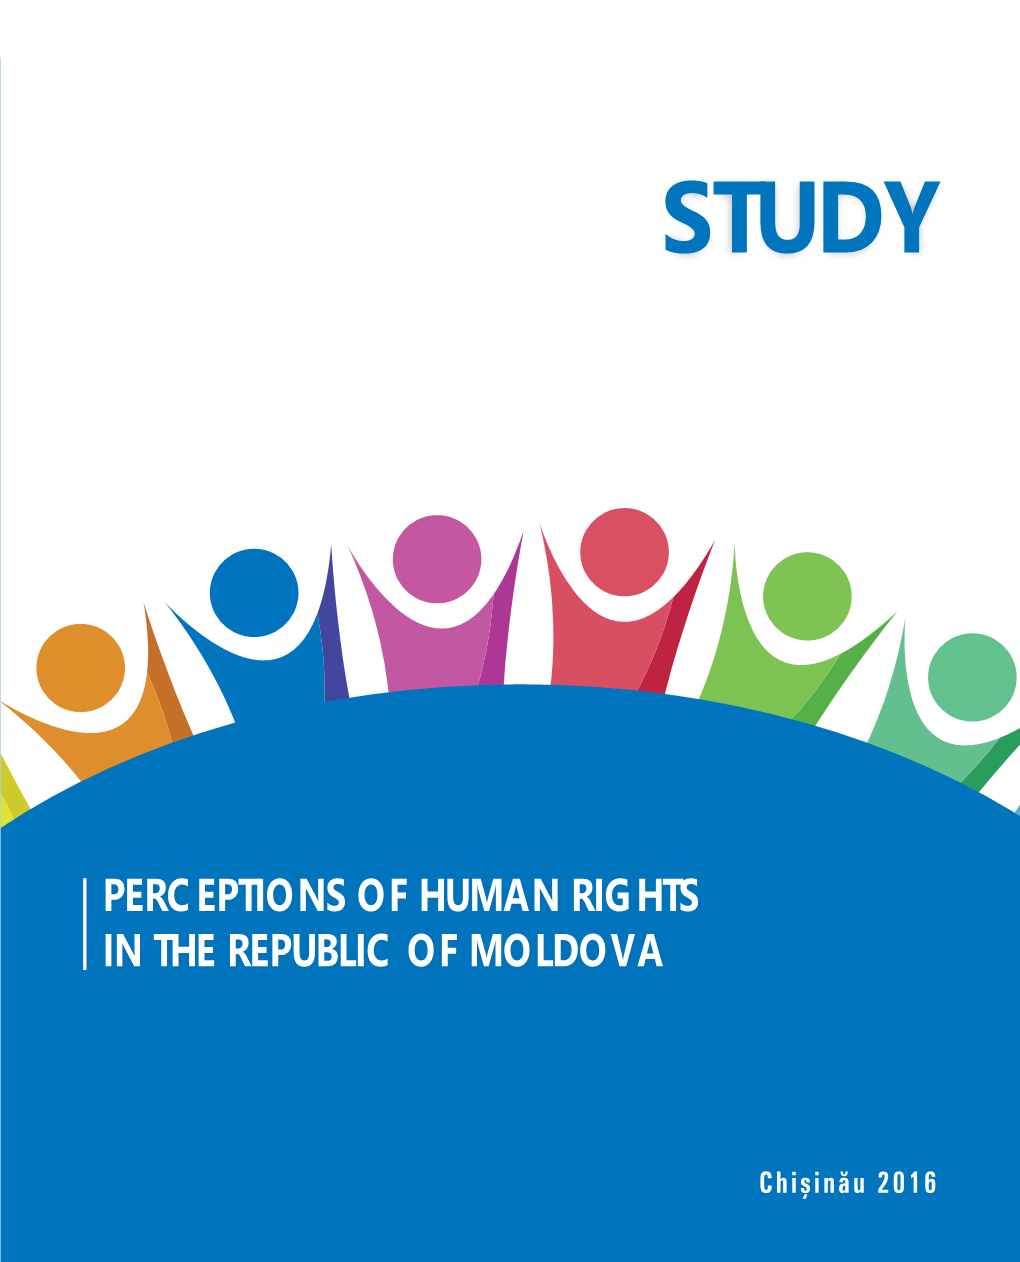 Perceptions of Human Rights in the Republic of Moldova